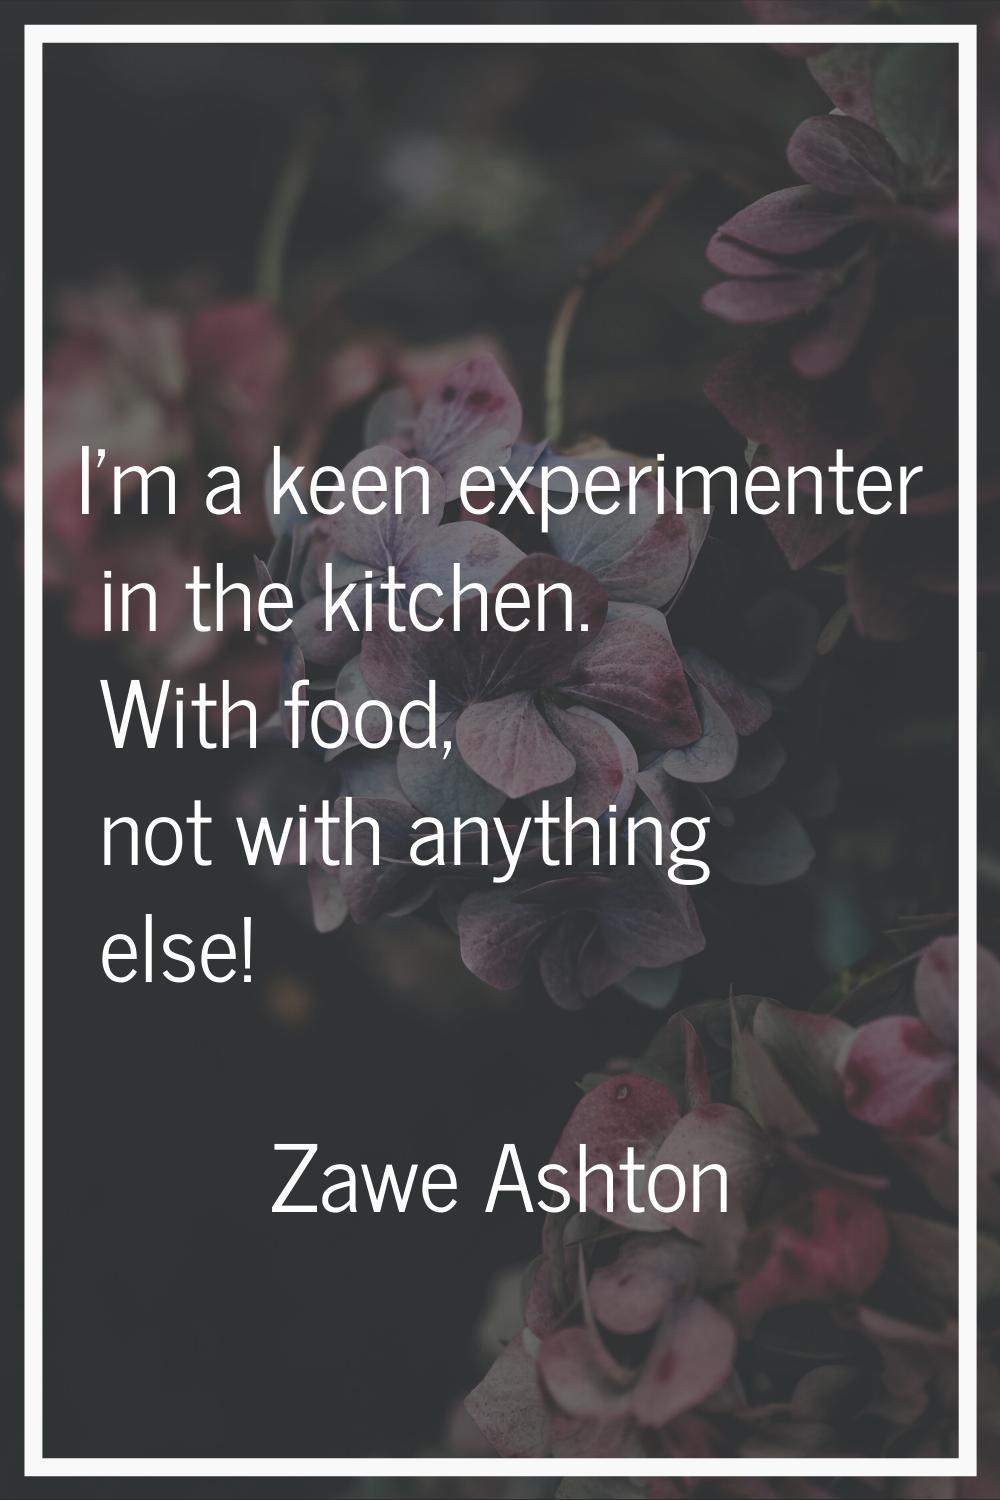 I'm a keen experimenter in the kitchen. With food, not with anything else!